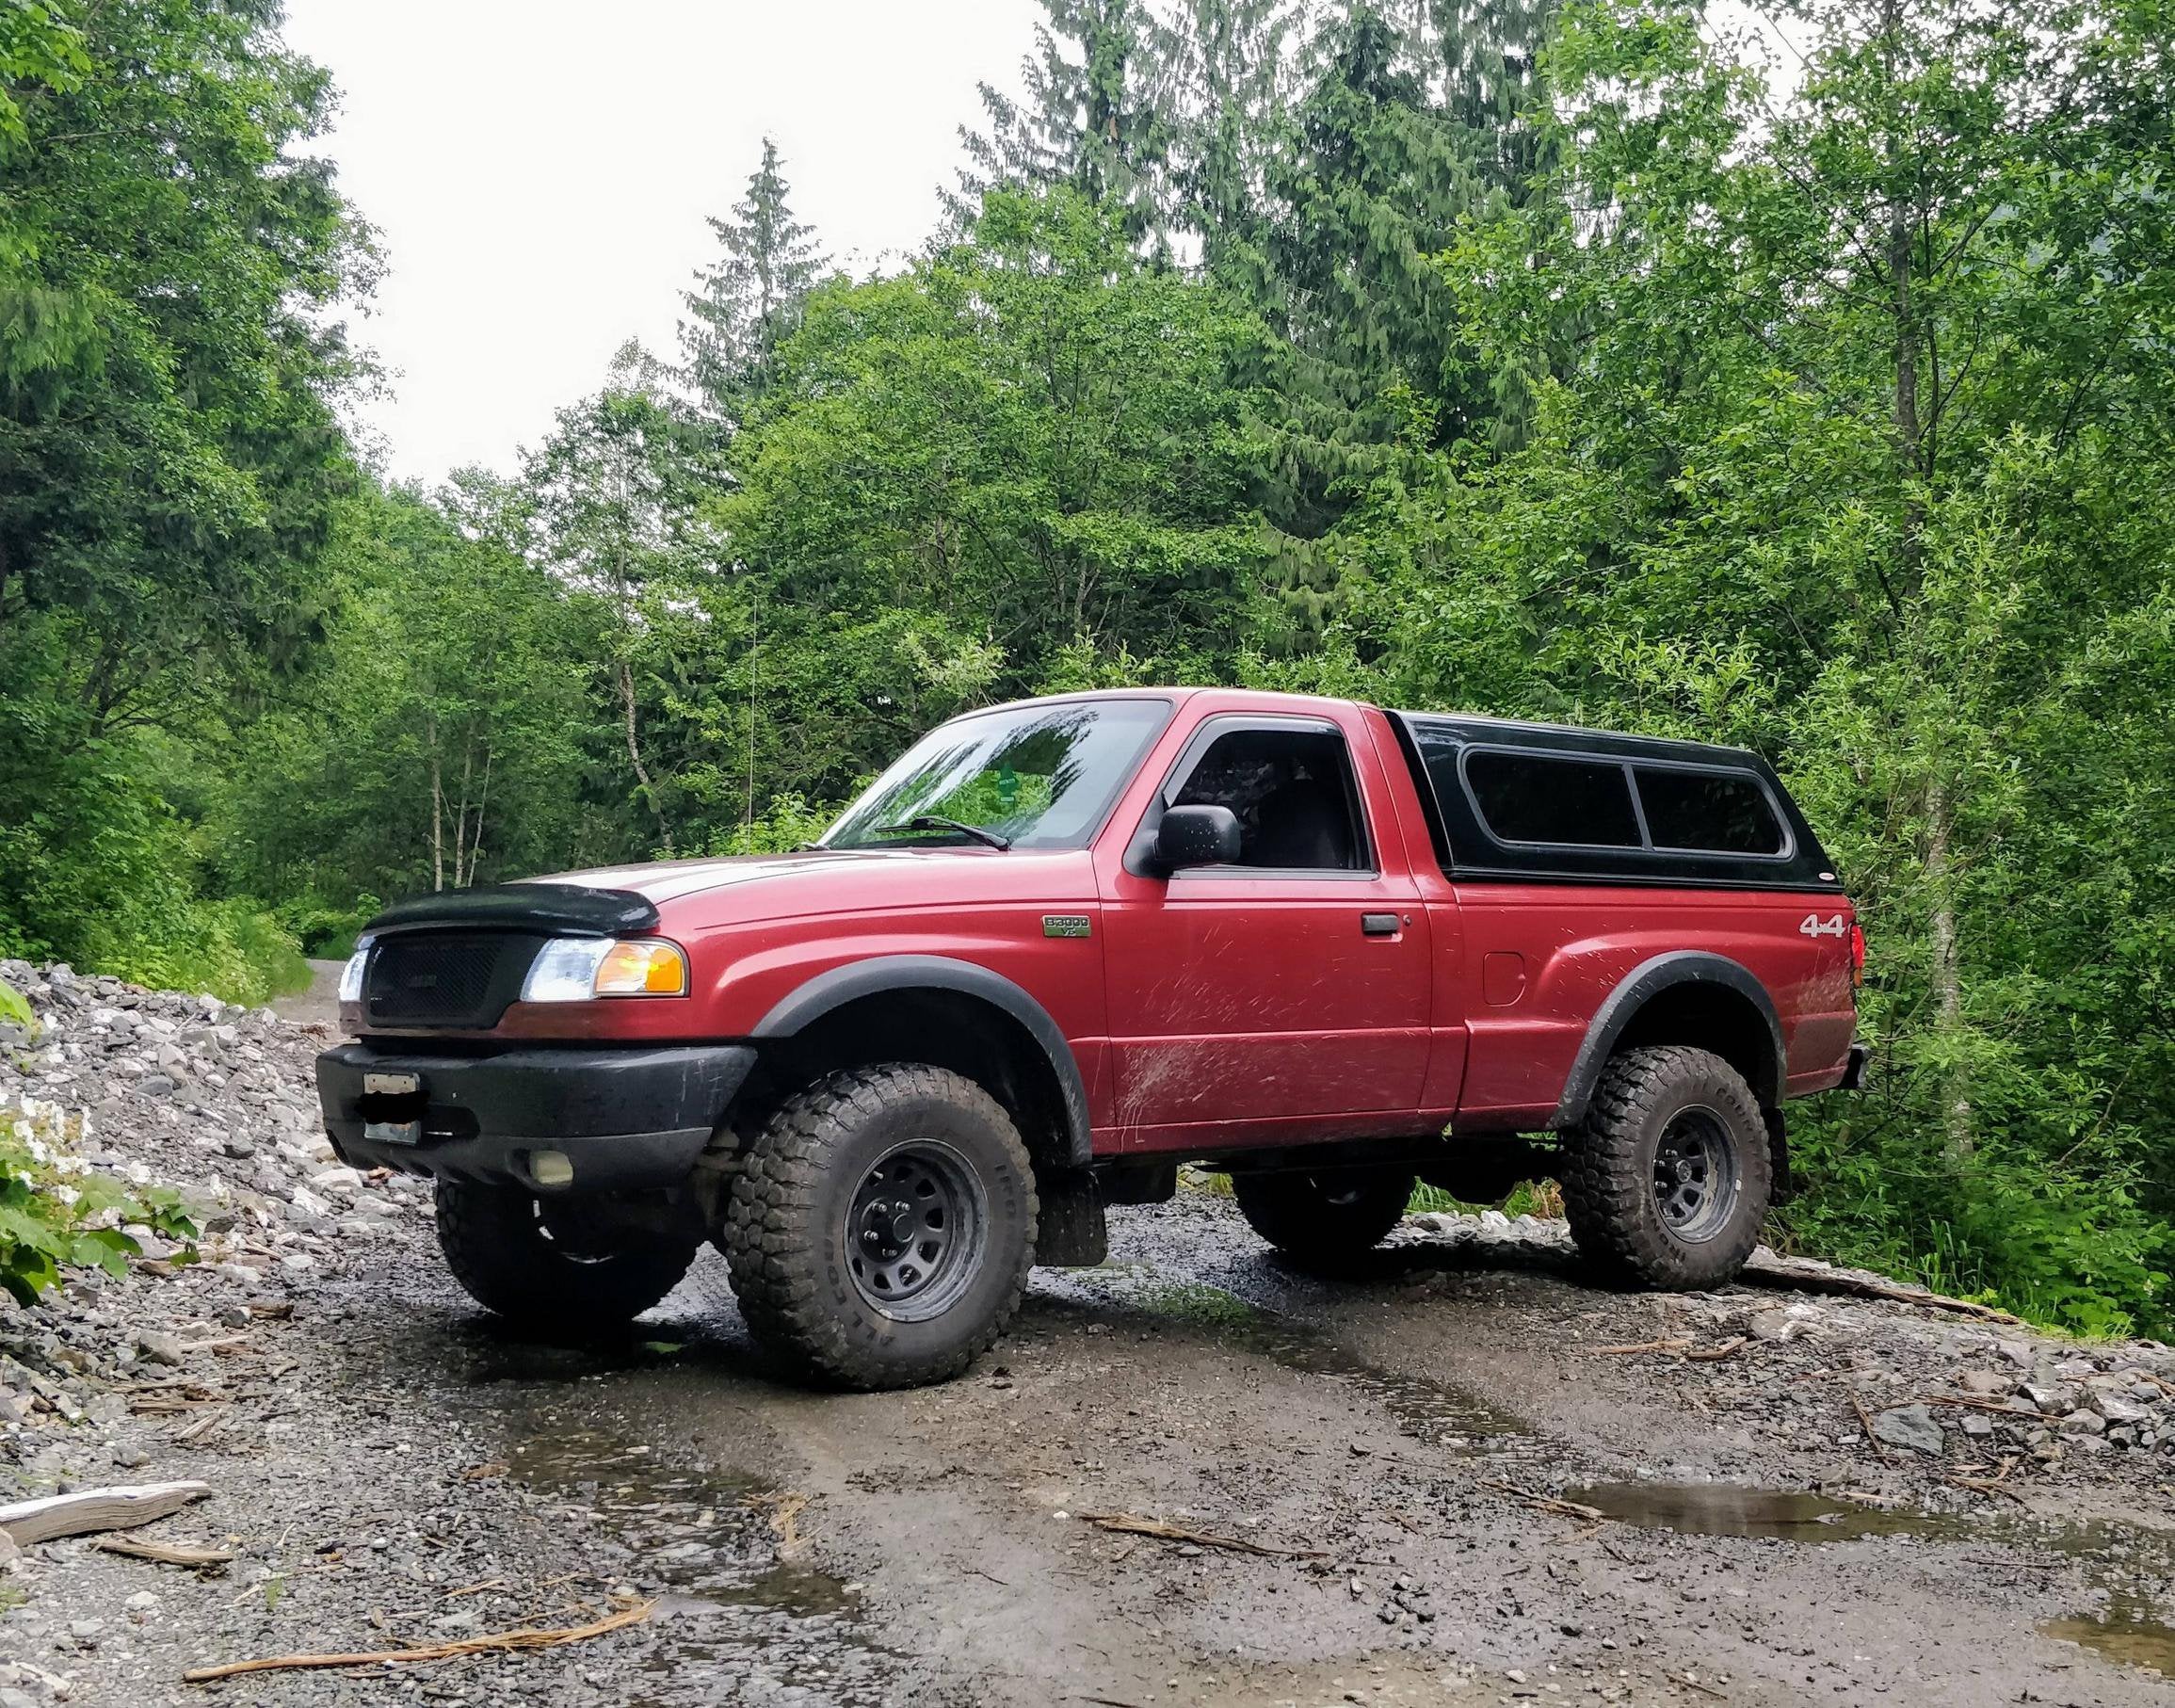 Thought i would finally post a pic of my Mazda. '98 B3000 4x4 : r/fordranger